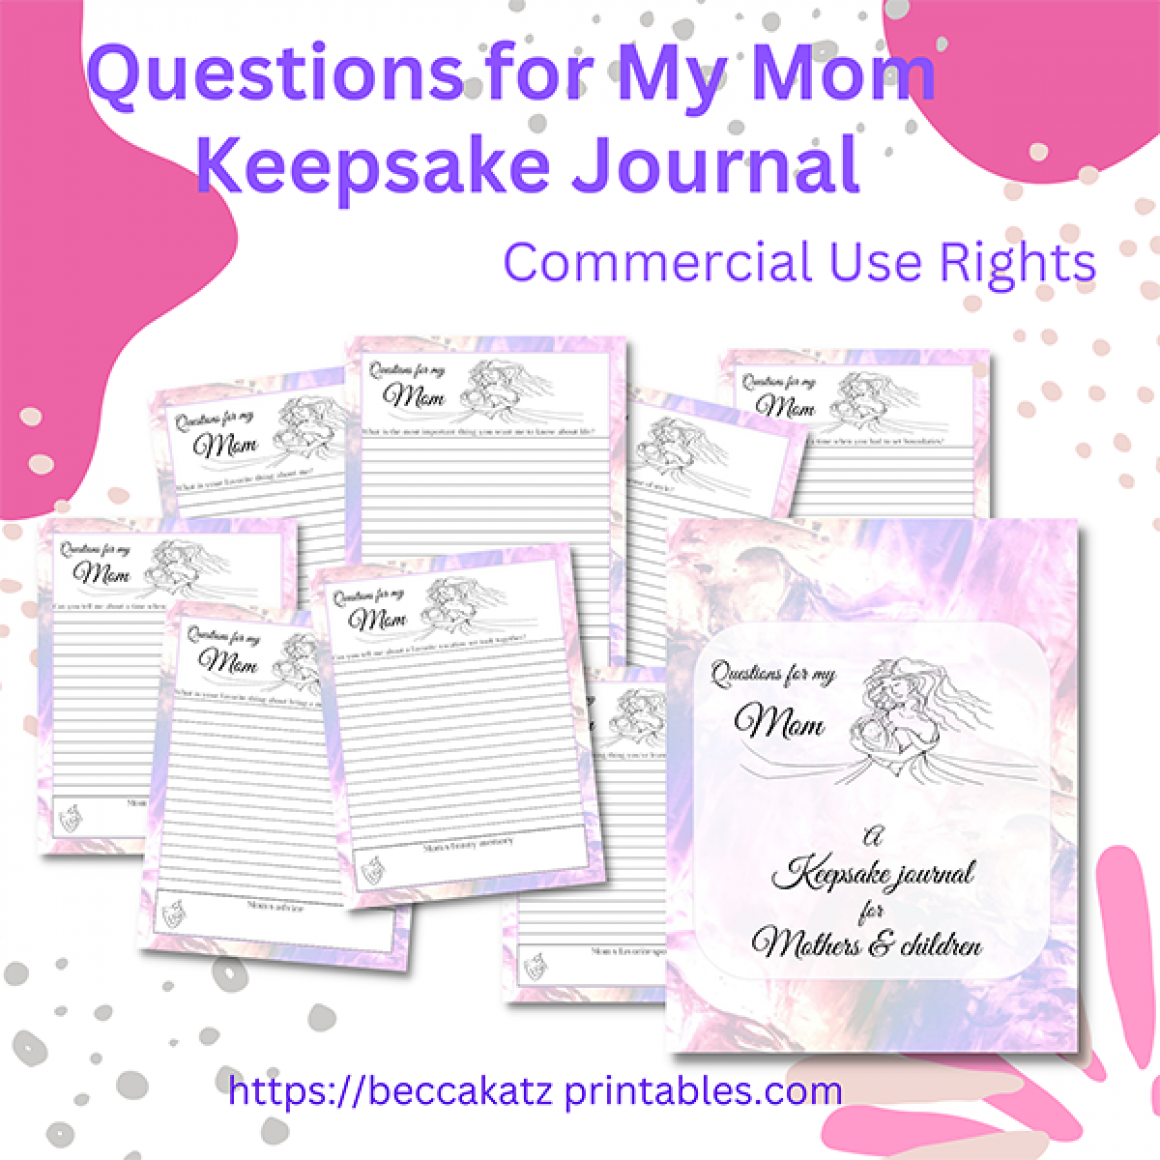 Questions for My Mom Keepsake Journal